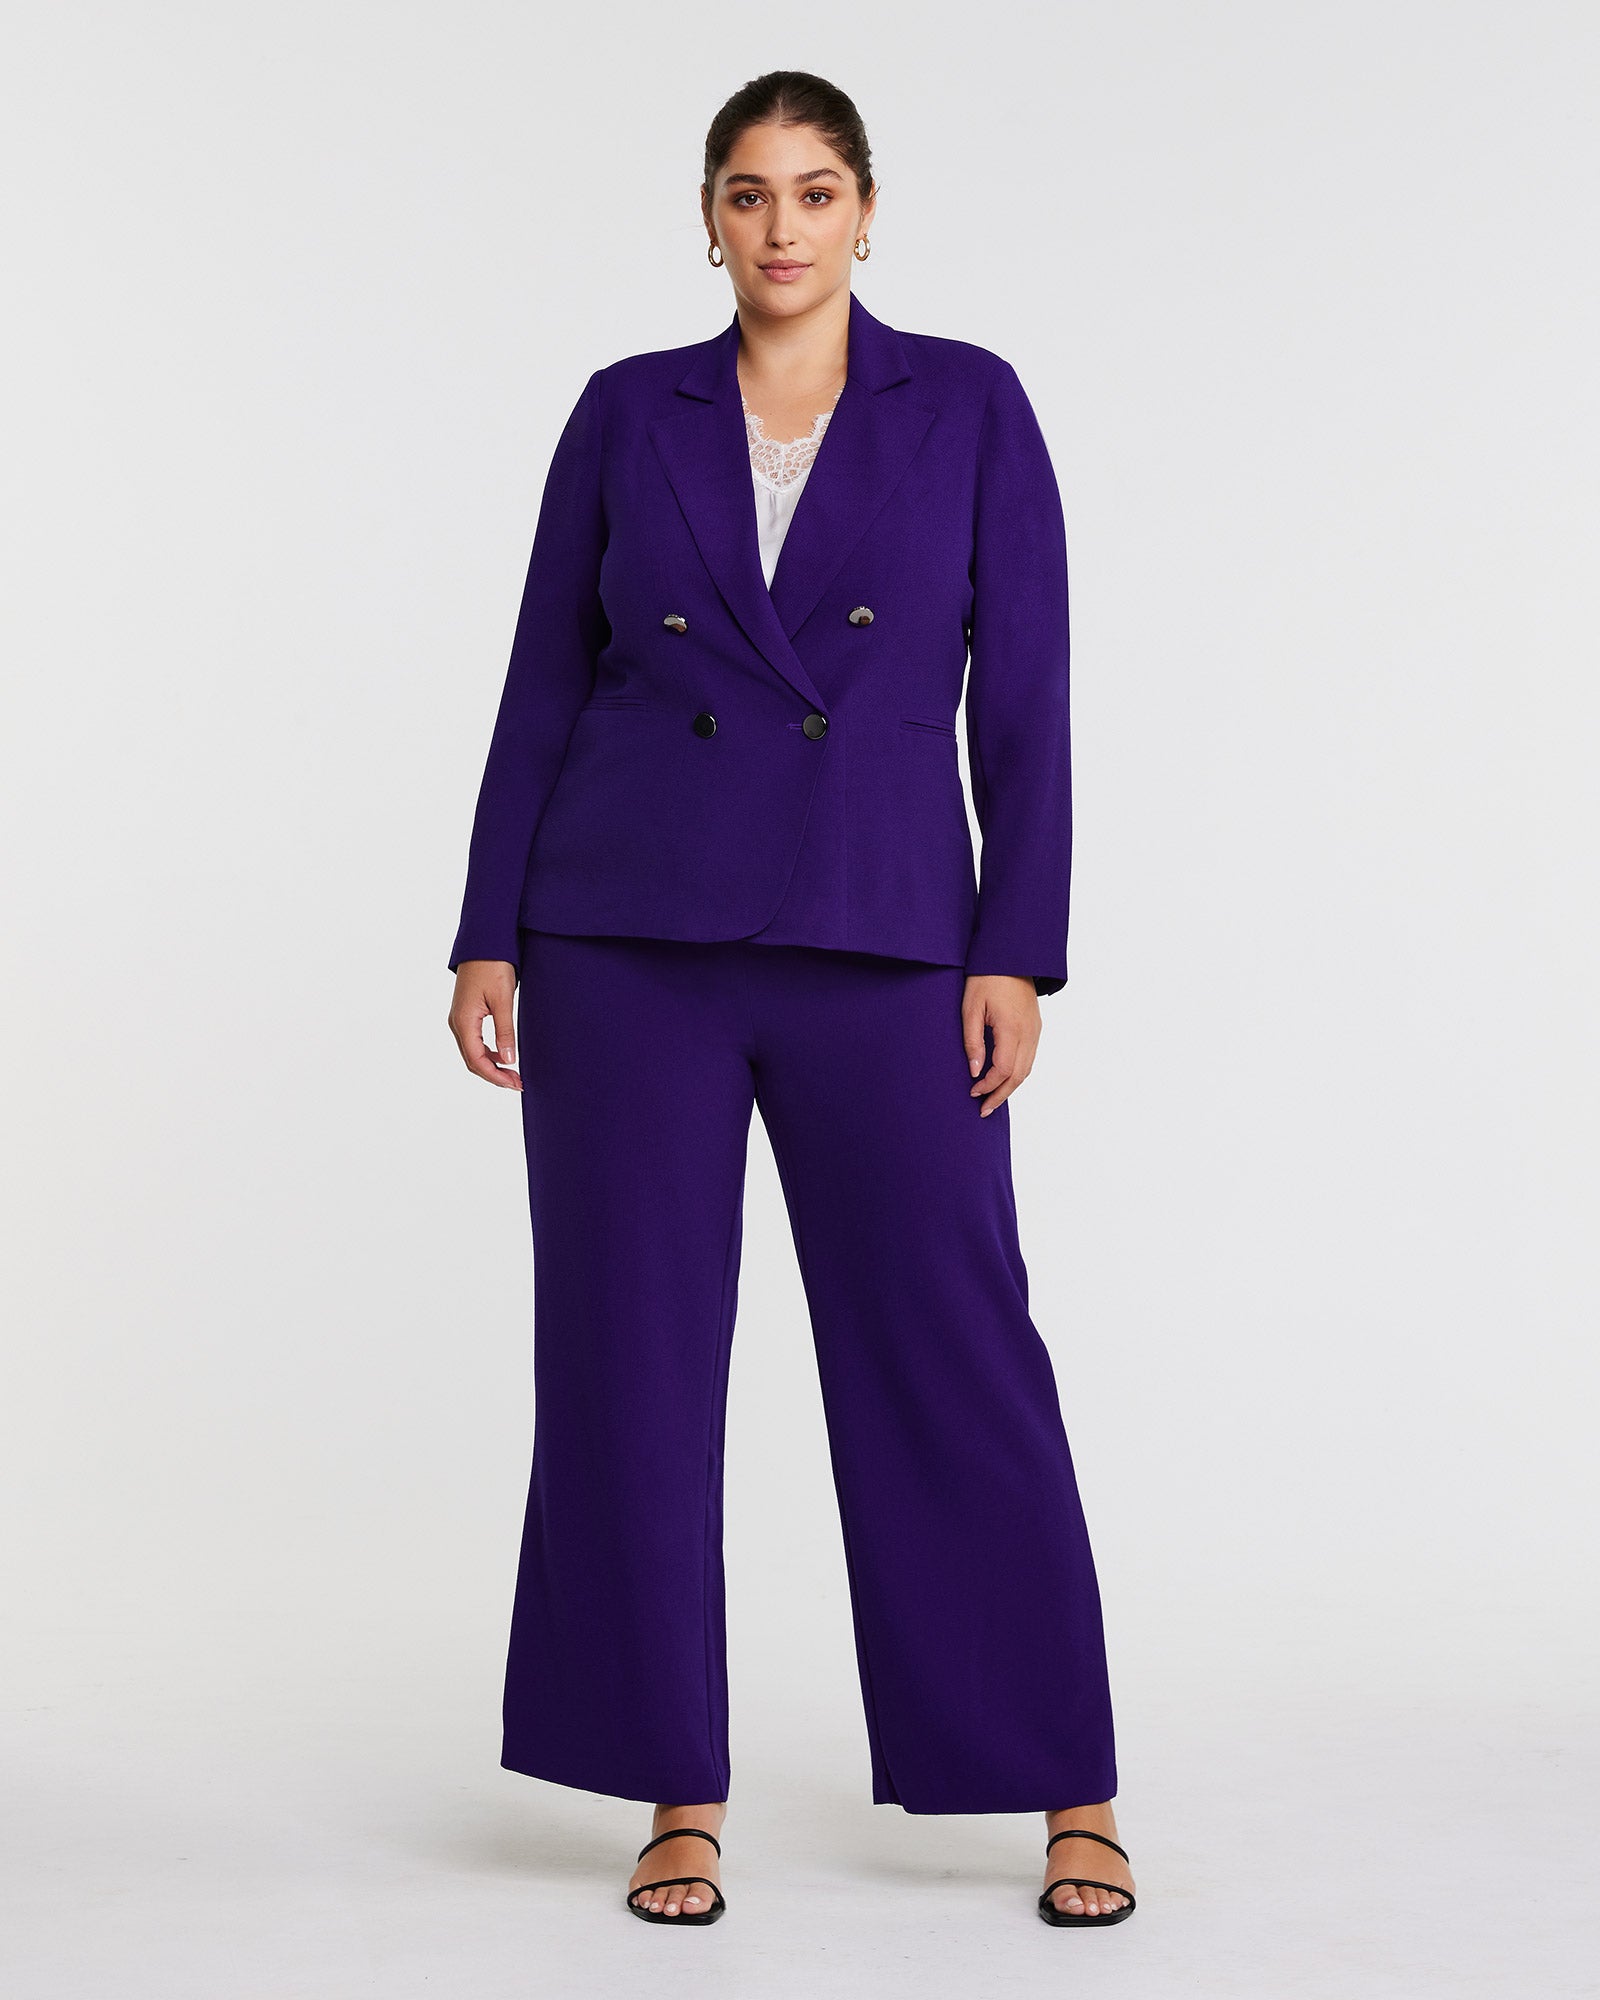 Achieve Sartorial Excellence with the Clever Purple Blazer Jacket and Nightlife Purple Wide Leg Pant